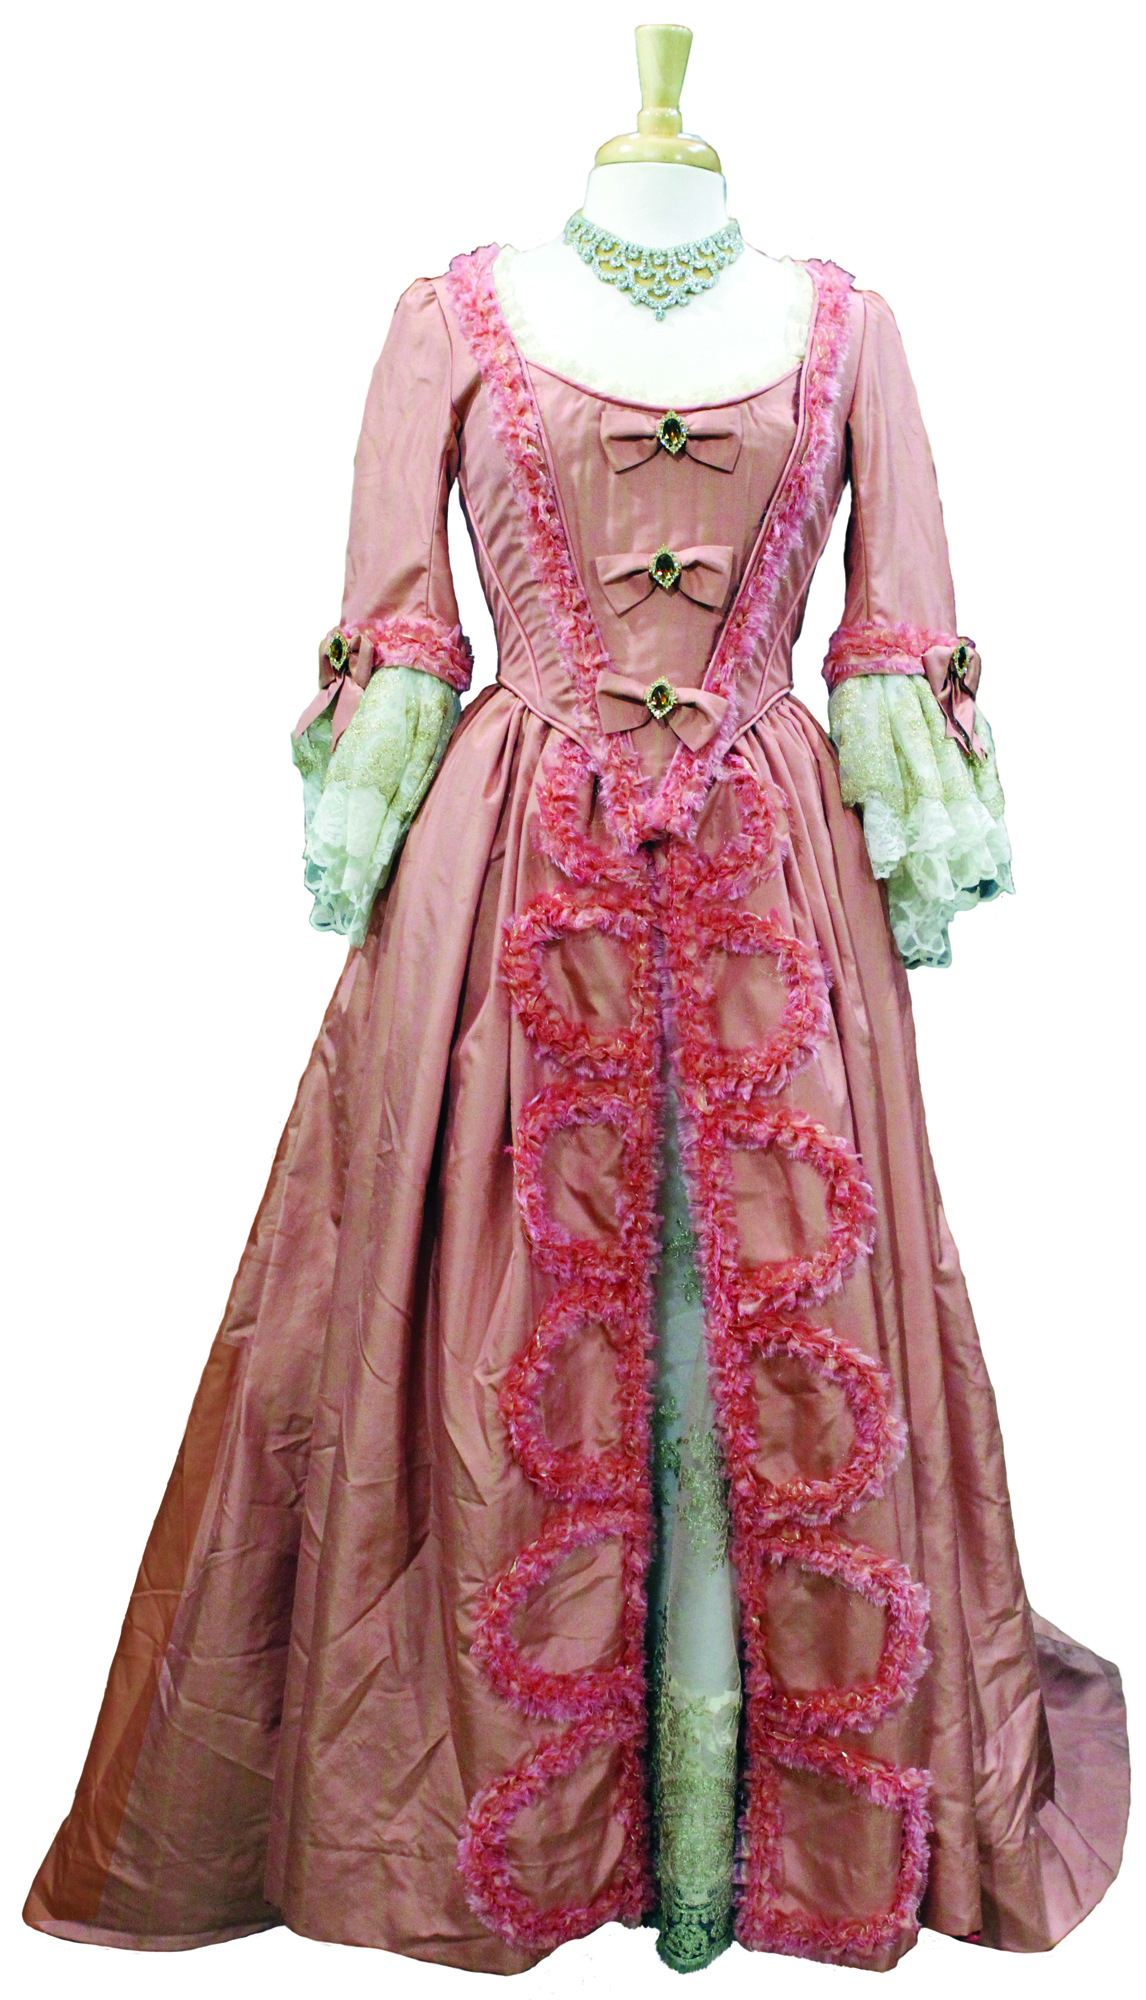 The Canadian Opera Company’s principal costume designer, Suzanne Mess, created this dress for the title character in Puccini’s “Manon Lescaut.”